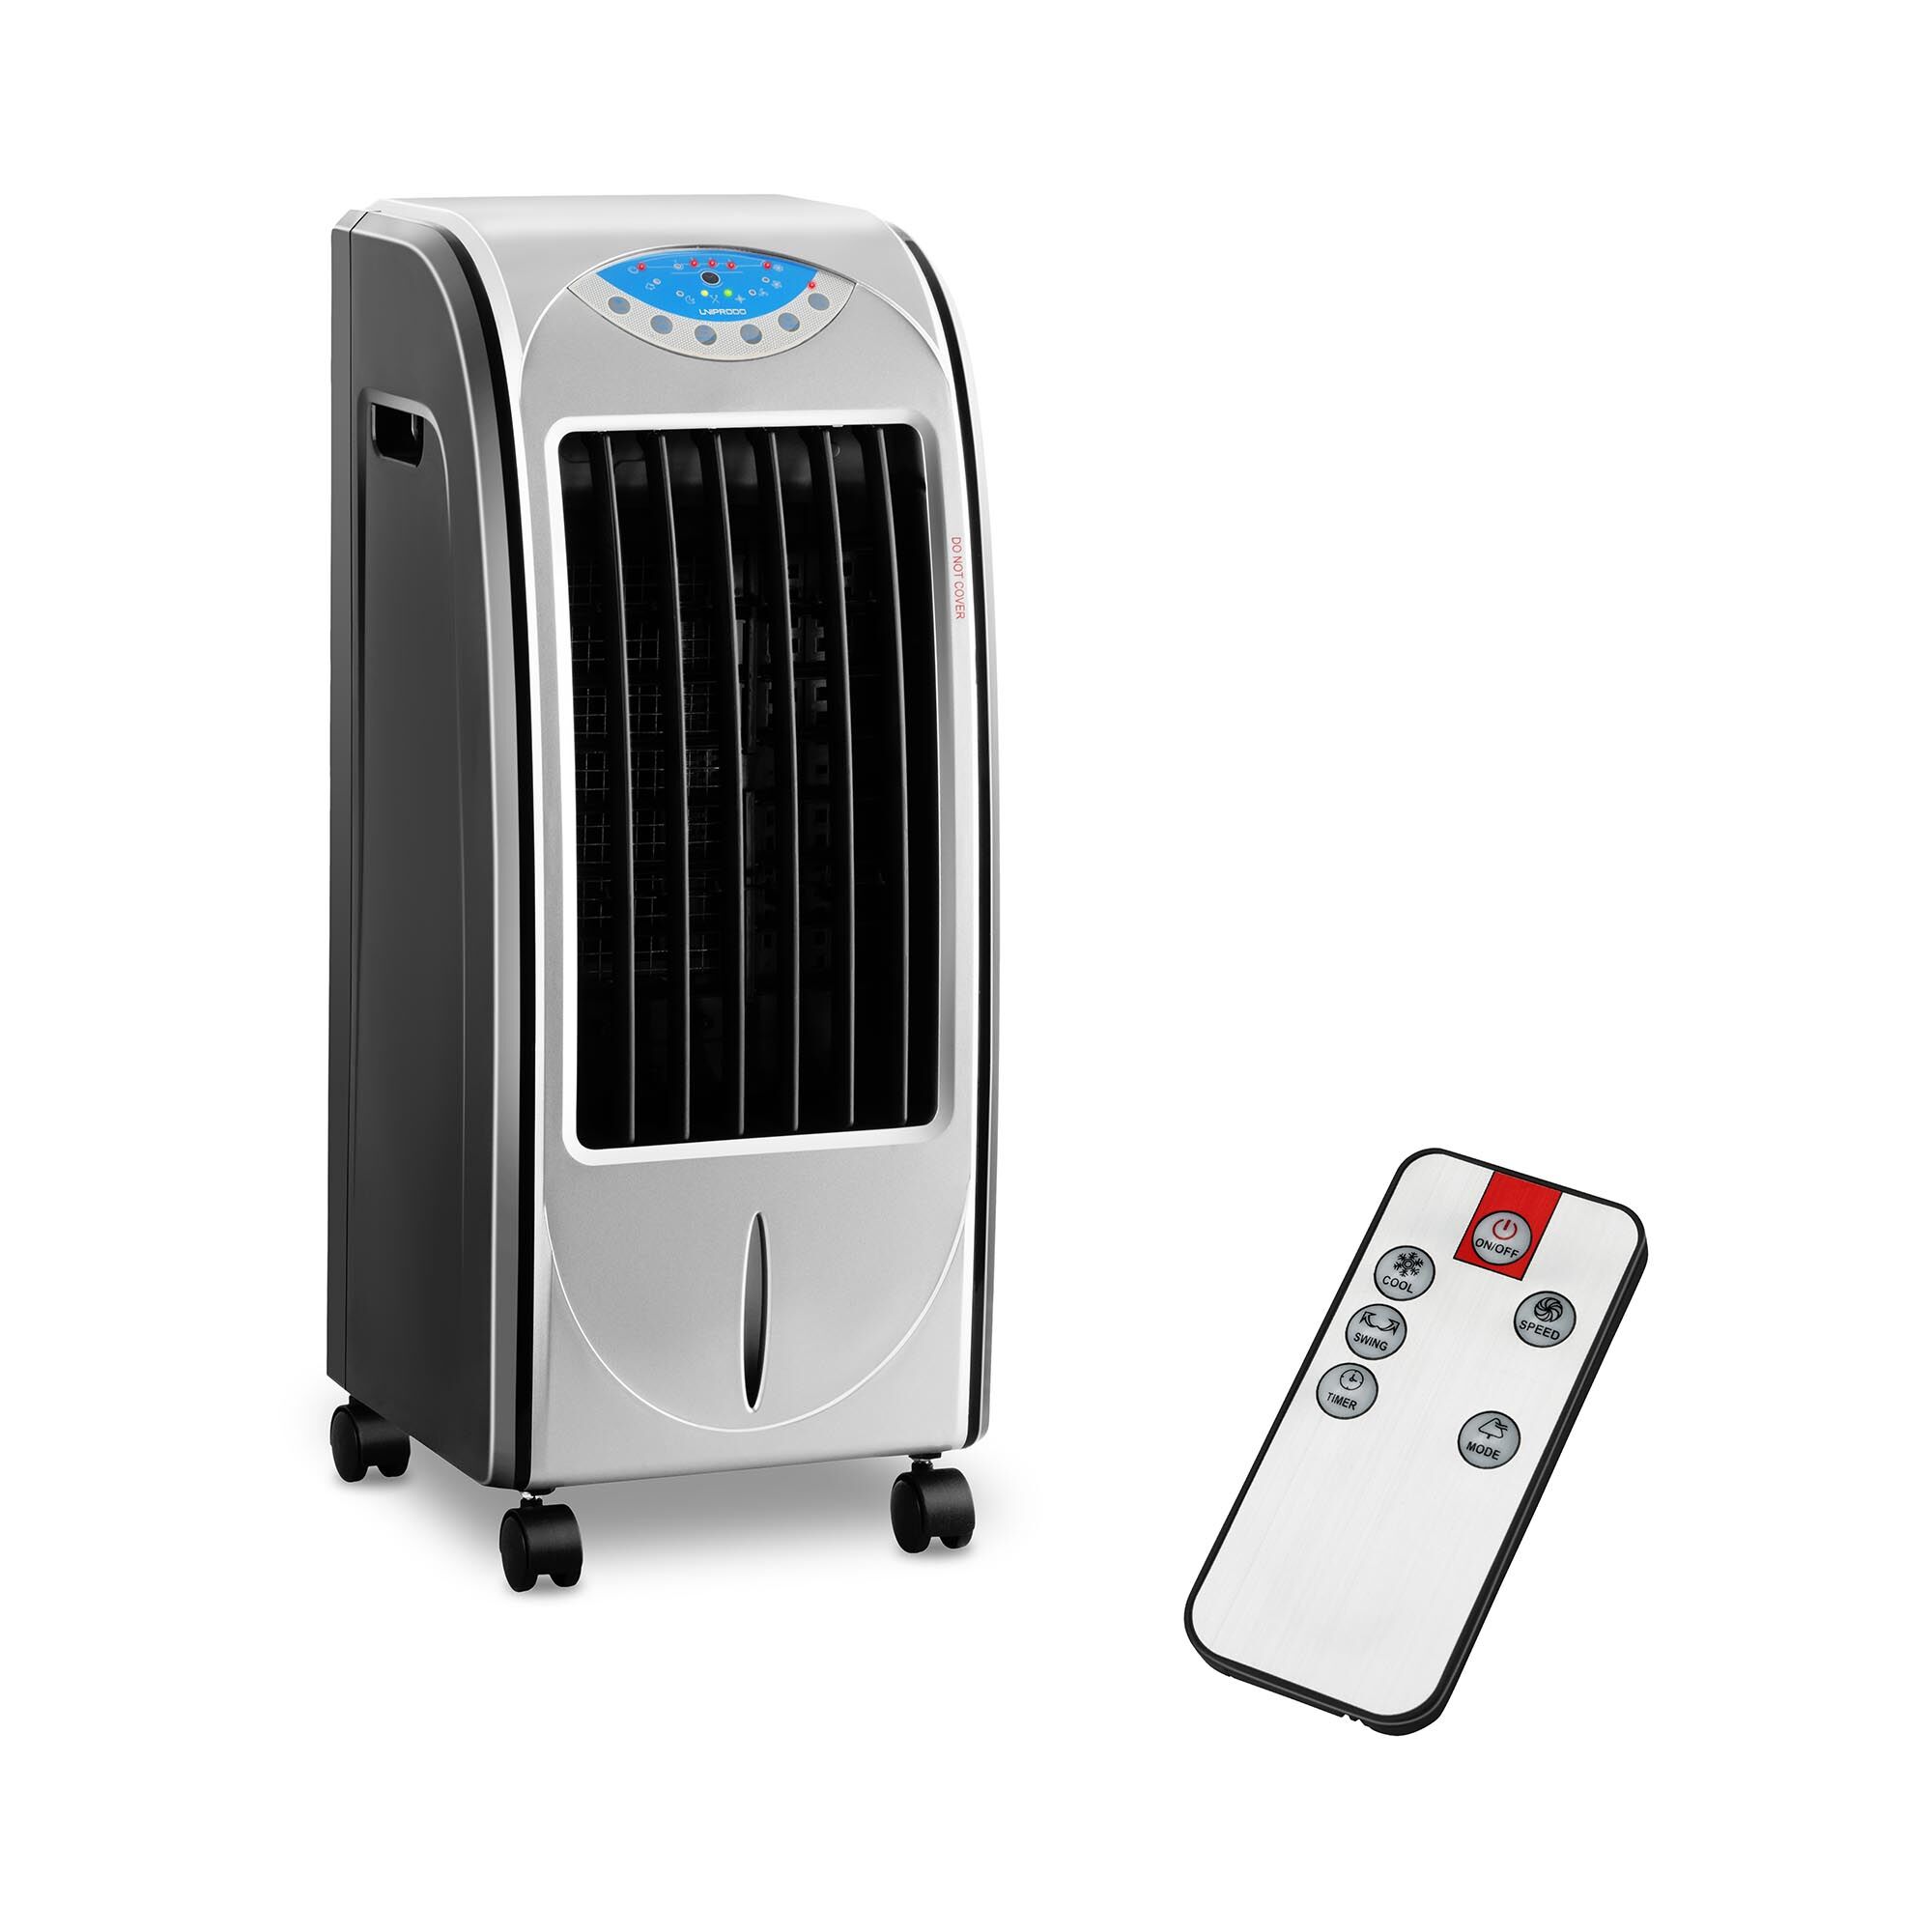 Uniprodo Factory seconds Water Air Cooler with Heat Function - 4-in-1 - 6 L water tank UNI_COOLER_01